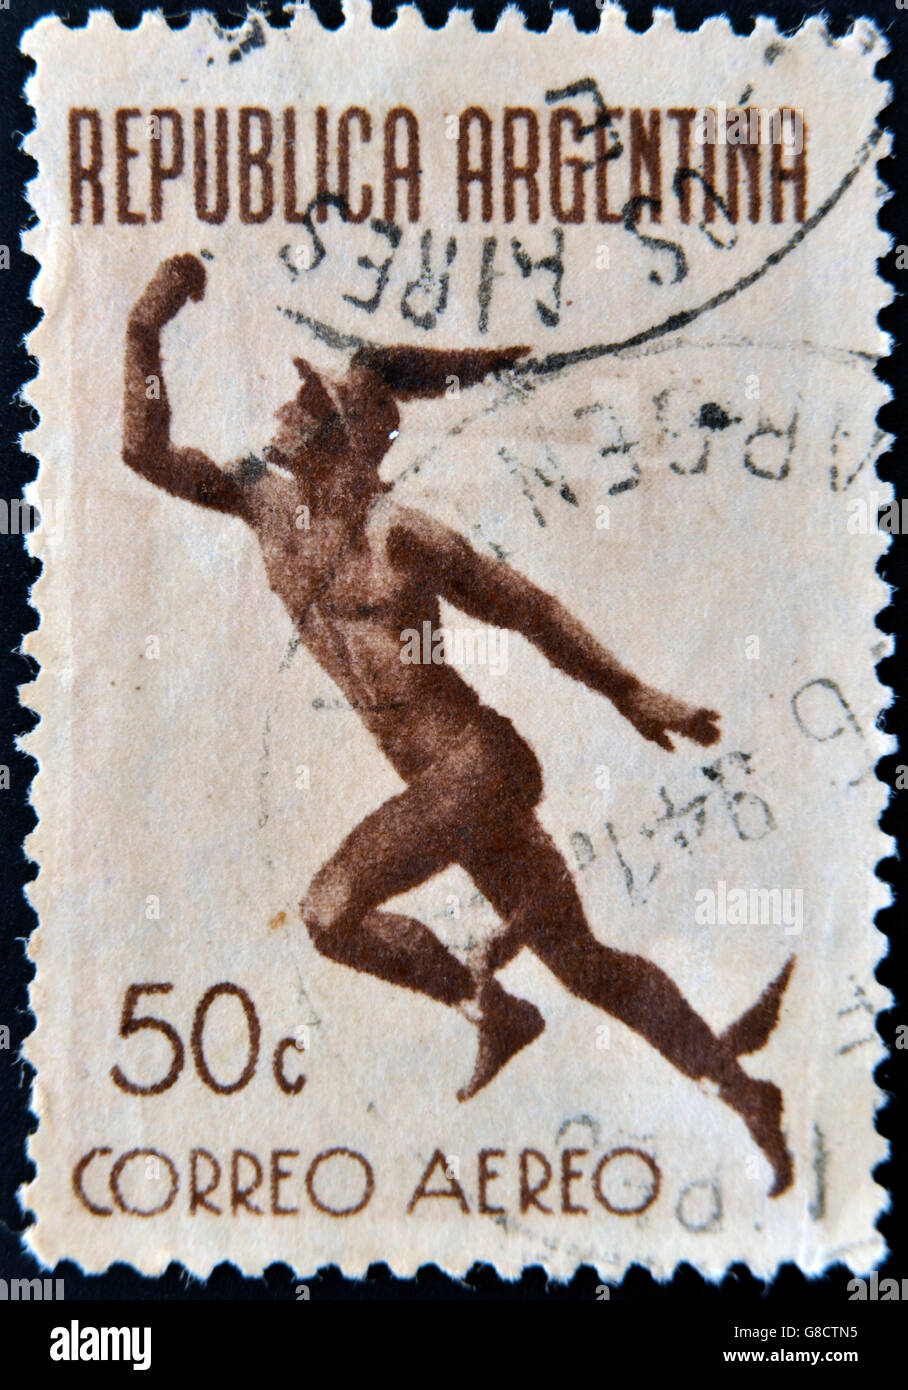 ARGENTINA - CIRCA 1949: A stamp printed in Argentina shows Mercury, messenger of the gods, circa 1949 Stock Photo